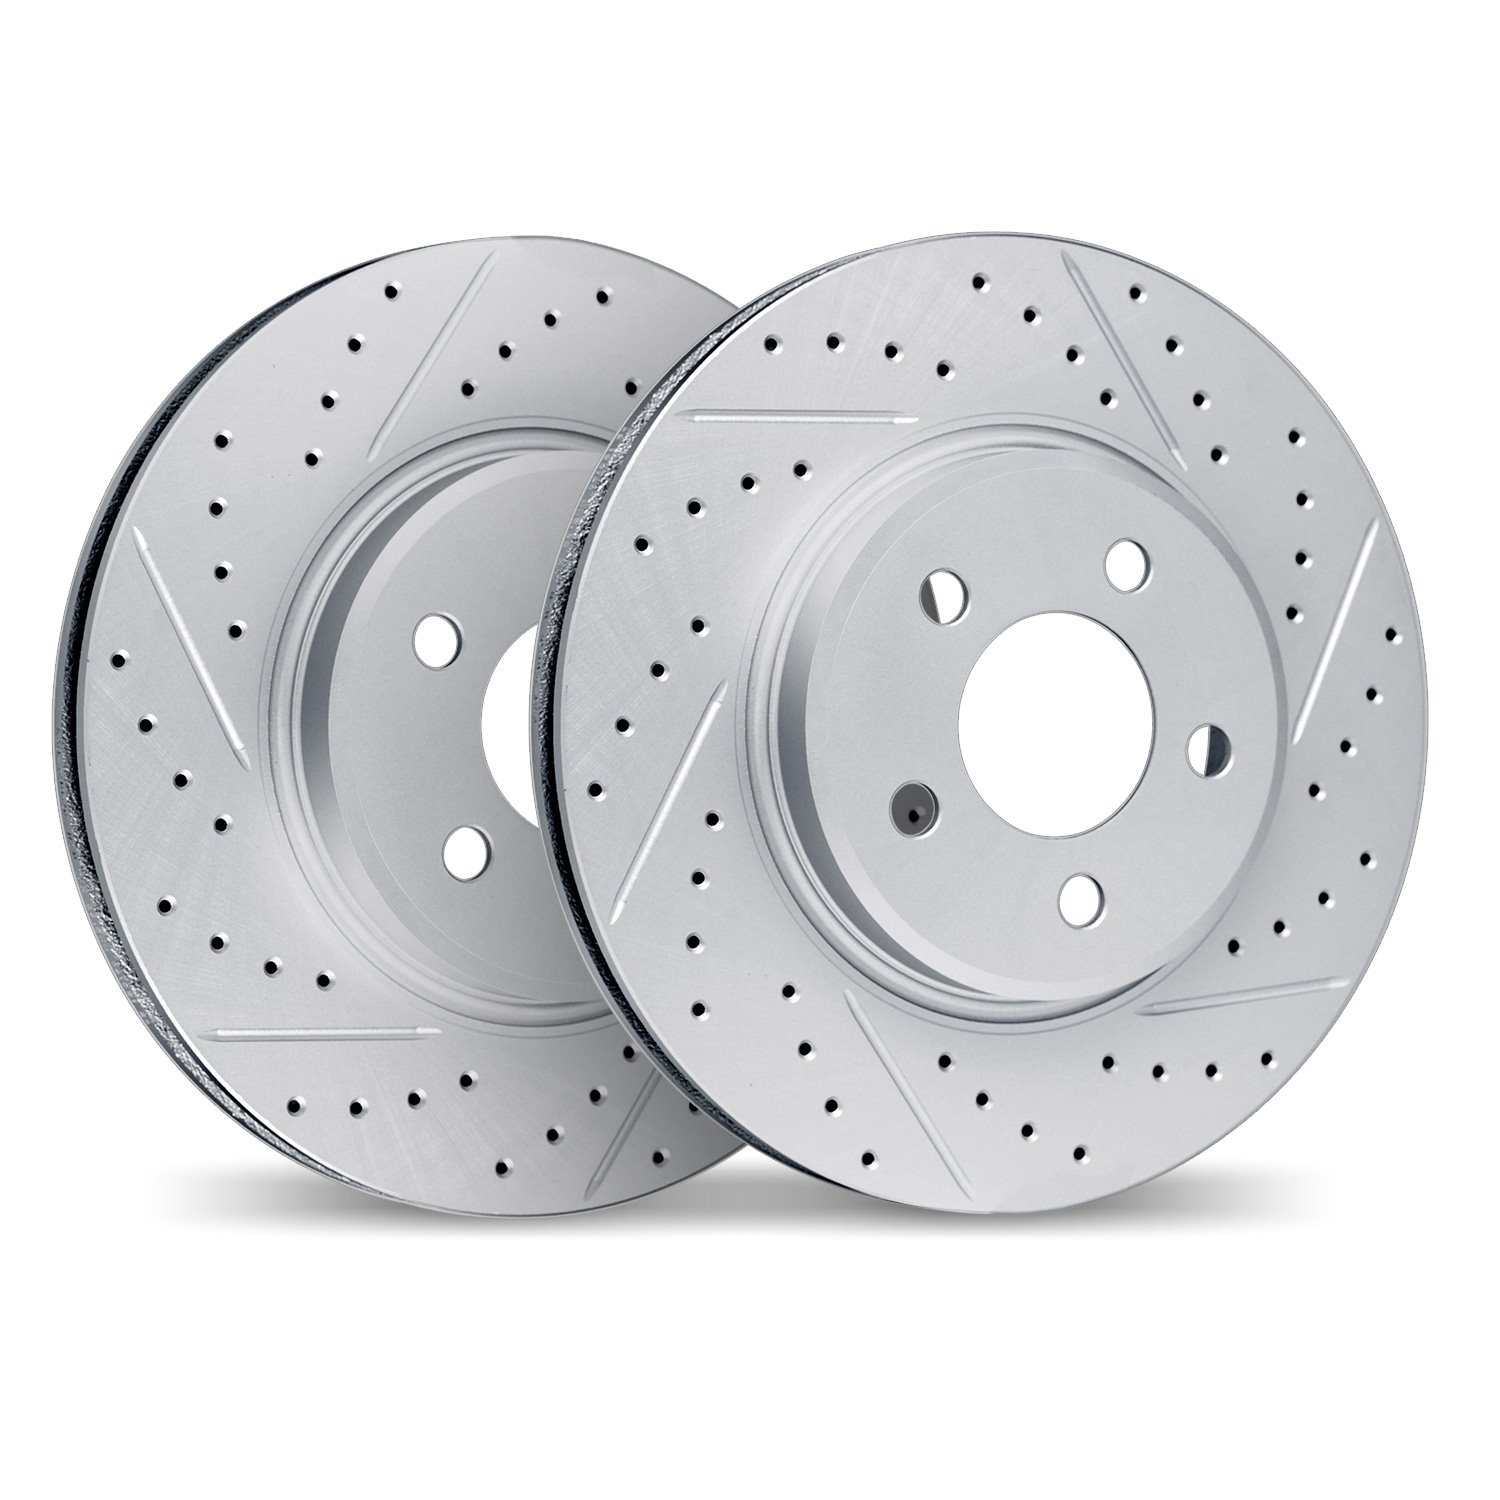 2002-54112 Geoperformance Drilled/Slotted Brake Rotors, 2014-2019 Ford/Lincoln/Mercury/Mazda, Position: Front